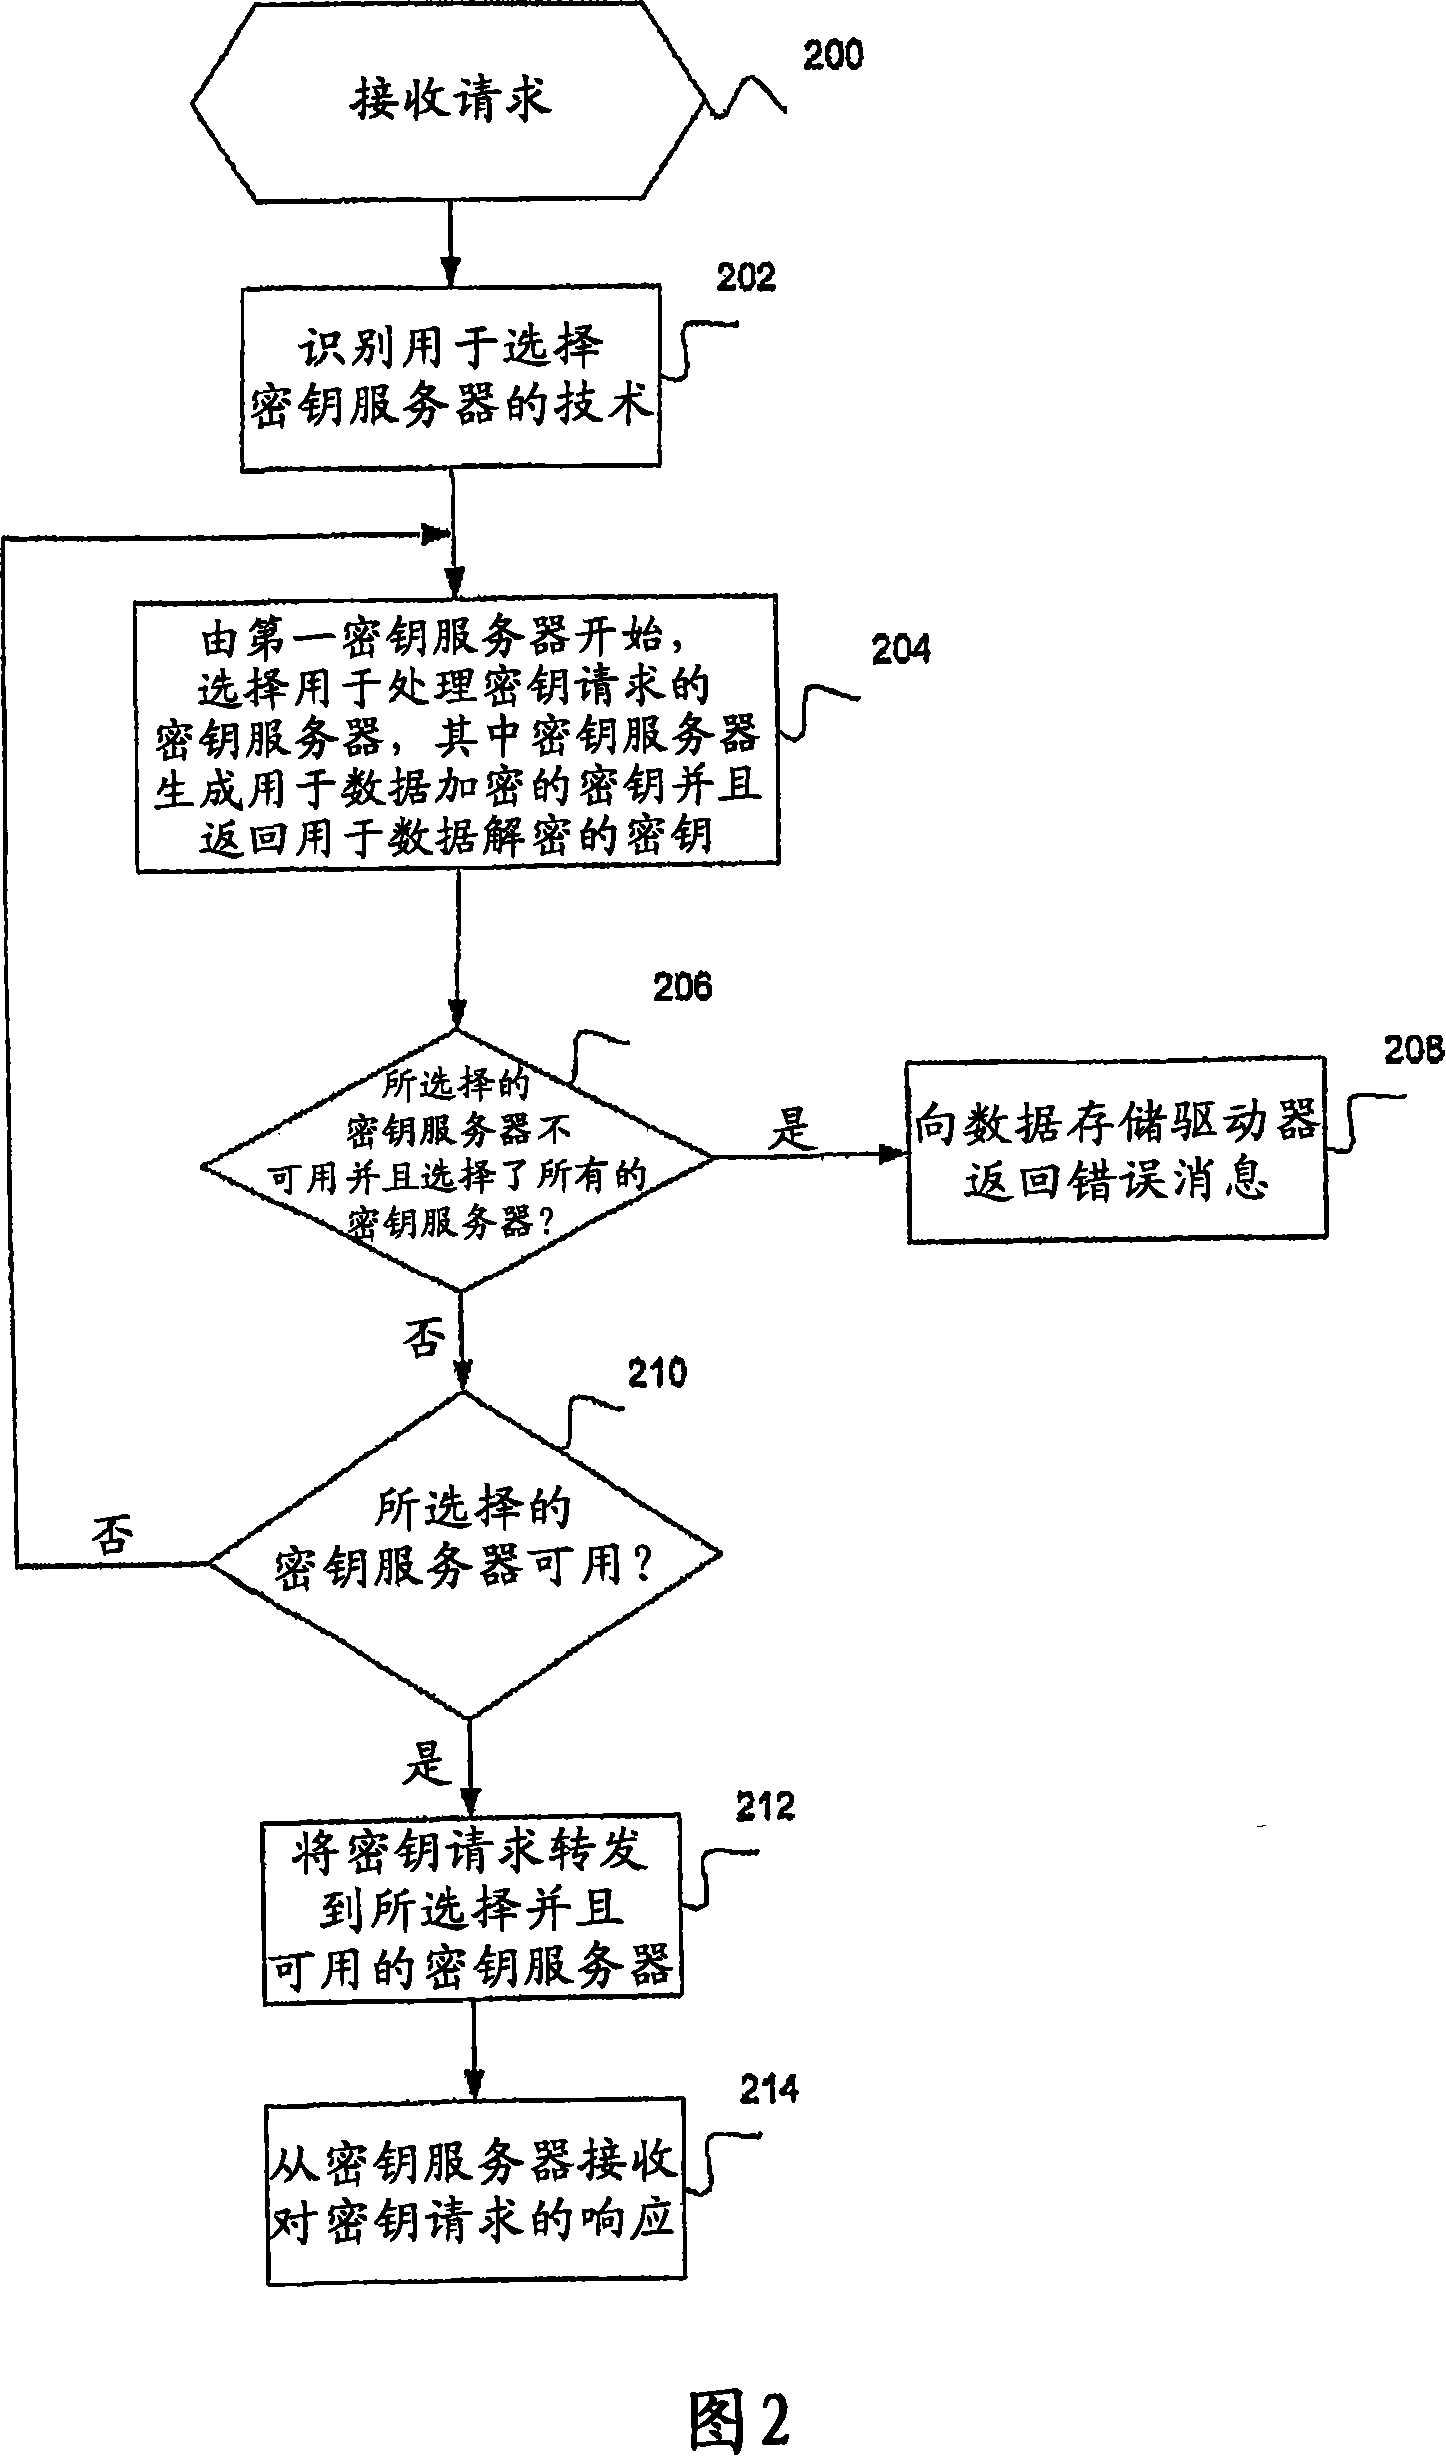 Method and system for key generation and retrieval using key servers